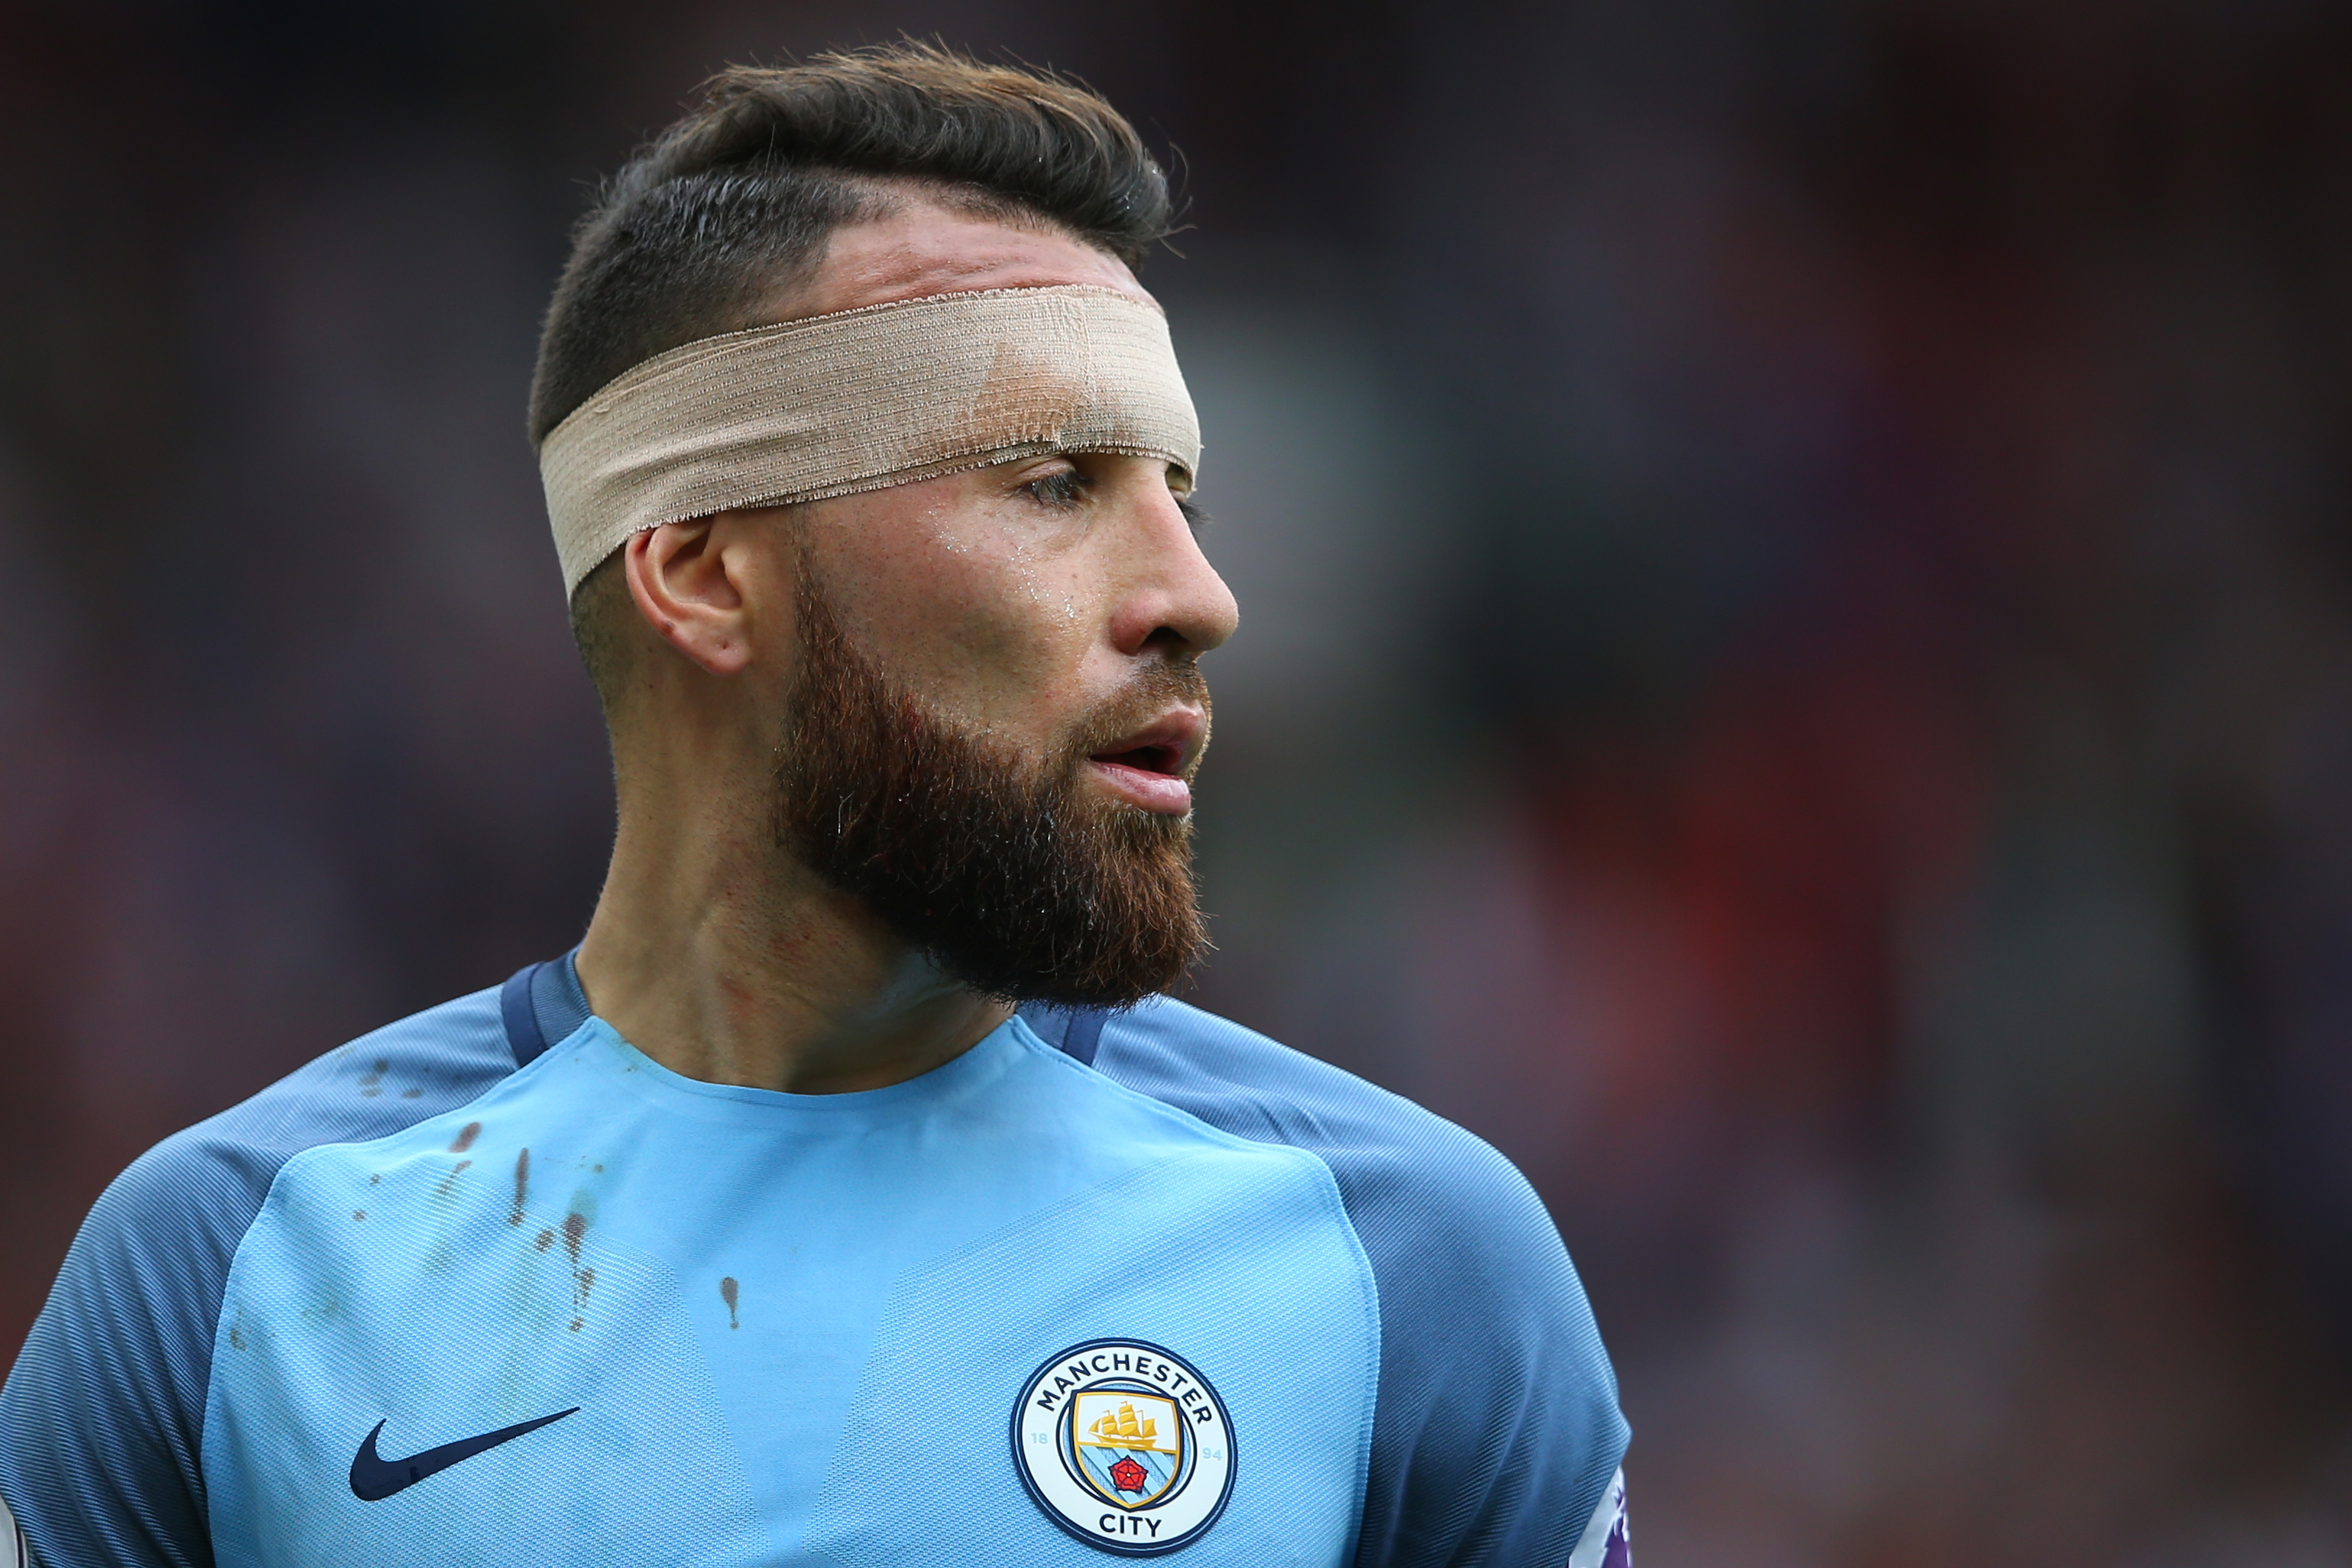 MANCHESTER, ENGLAND - SEPTEMBER 10:  Nicolas Otamendi of Manchester City wears a bandage during the Premier League match between Manchester United and Manchester City at Old Trafford on September 10, 2016 in Manchester, England.  (Photo by Alex Livesey/Getty Images)